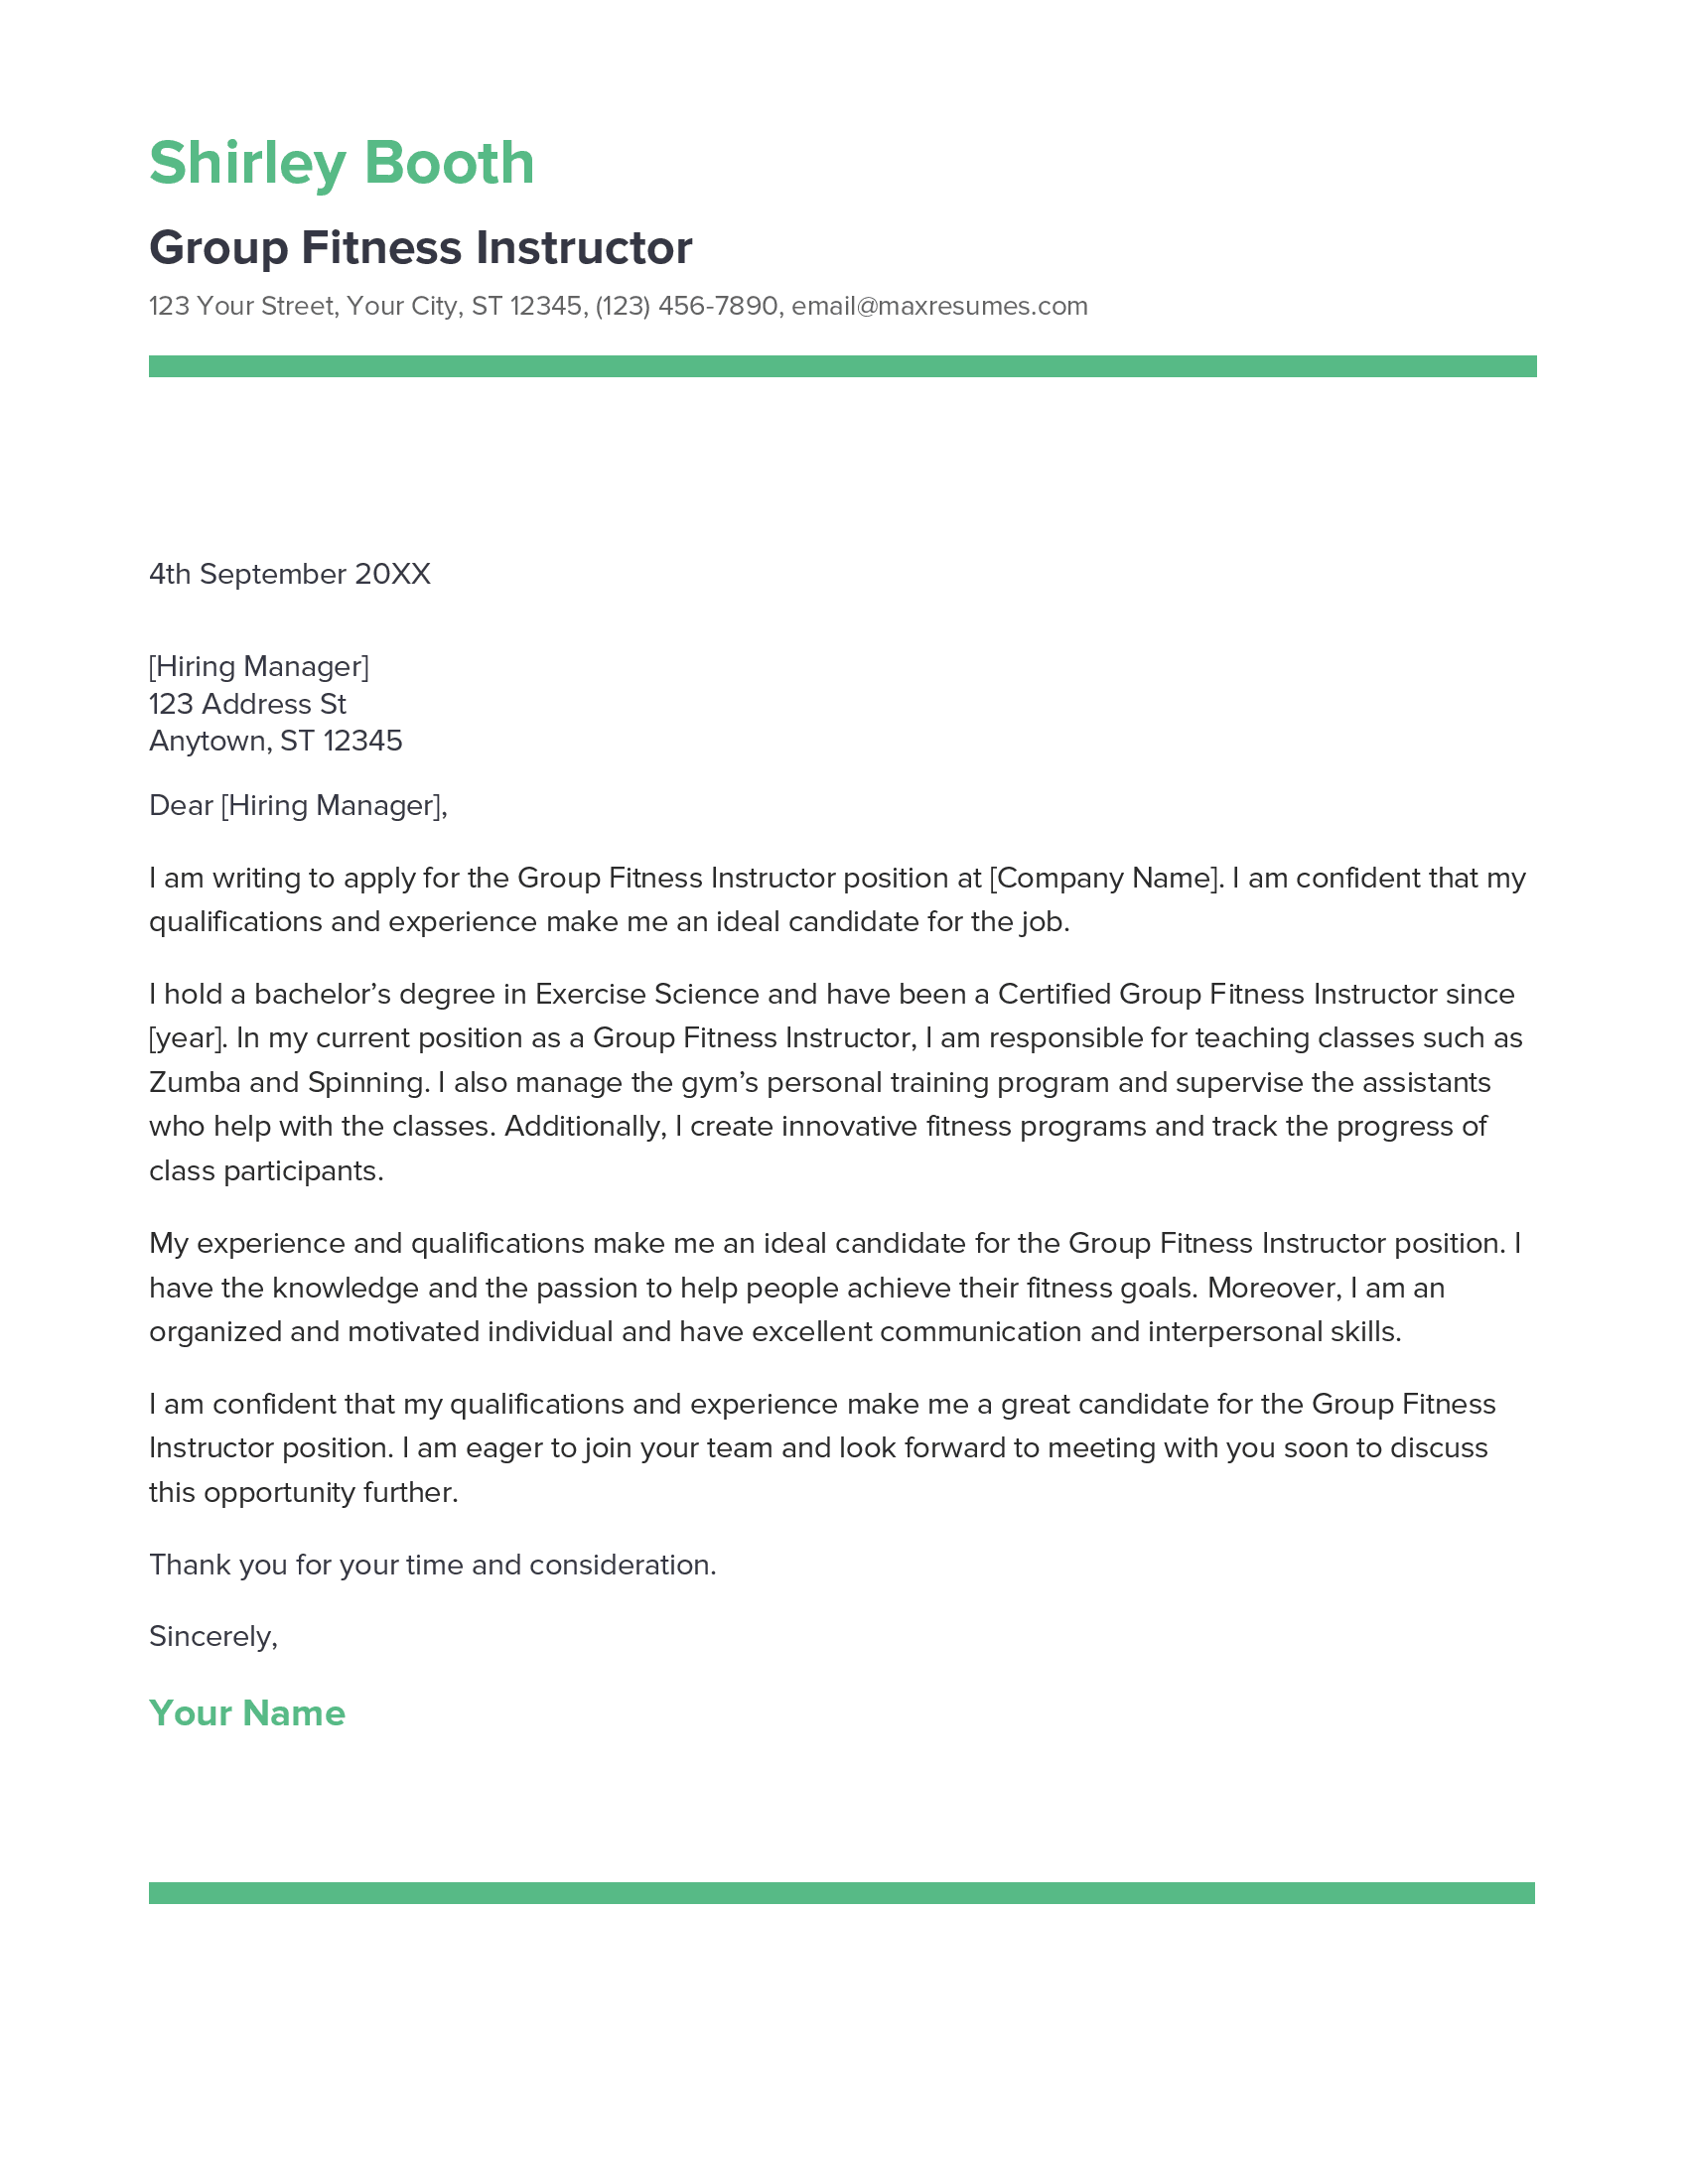 Group Fitness Instructor Cover Letter Example